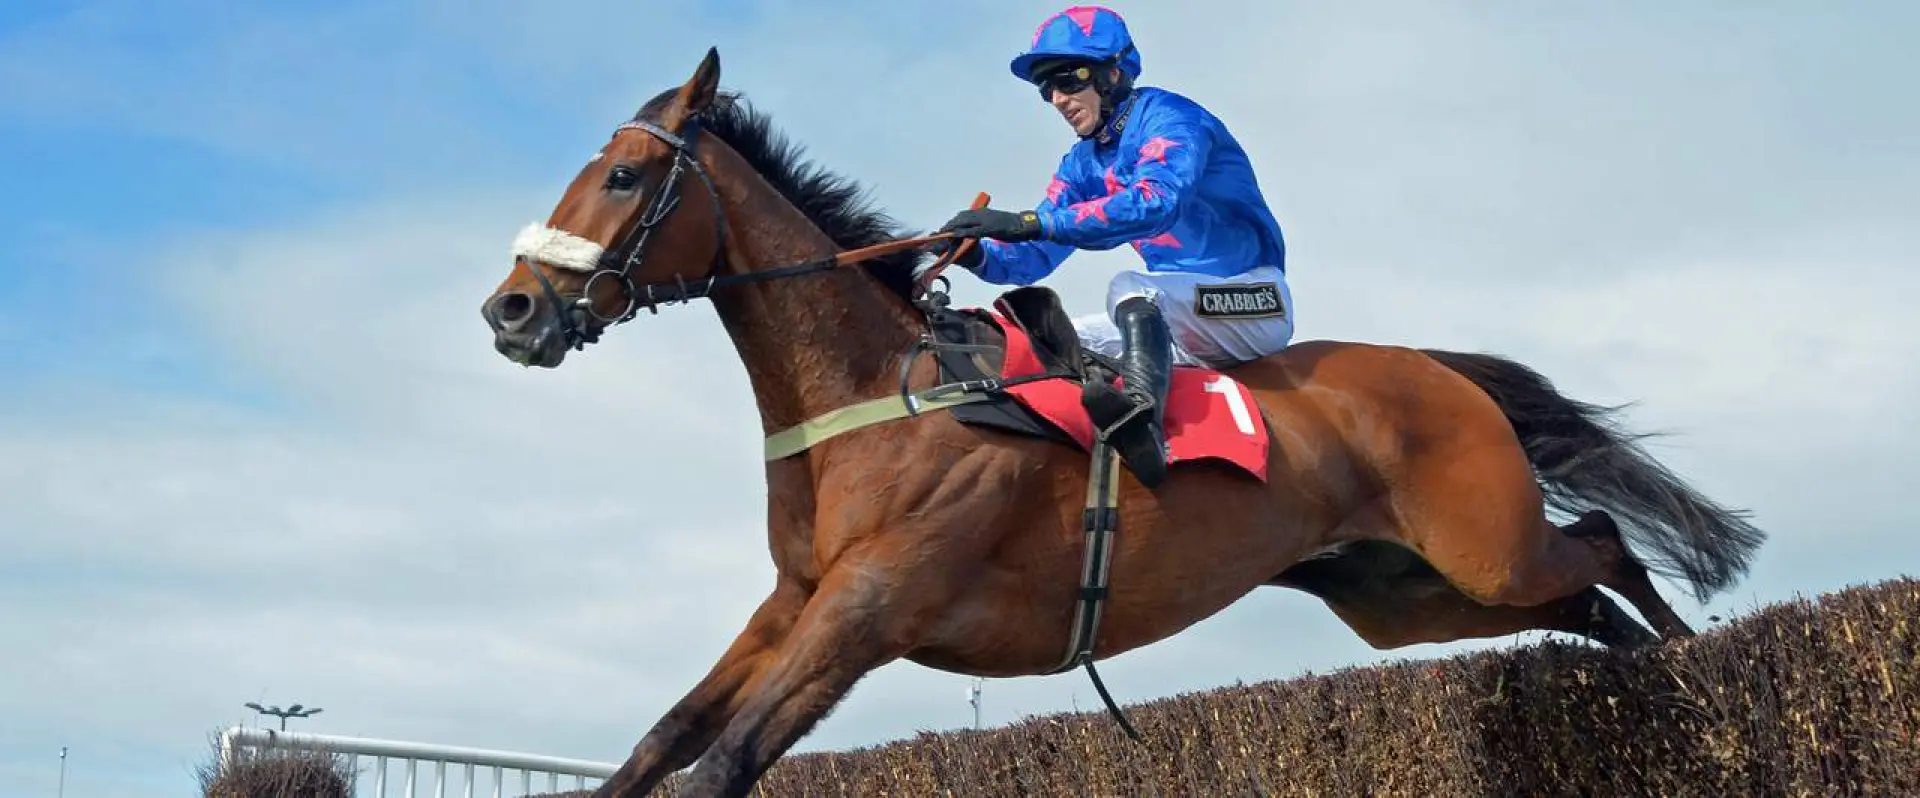 2016 King George VI Chase runner profiles